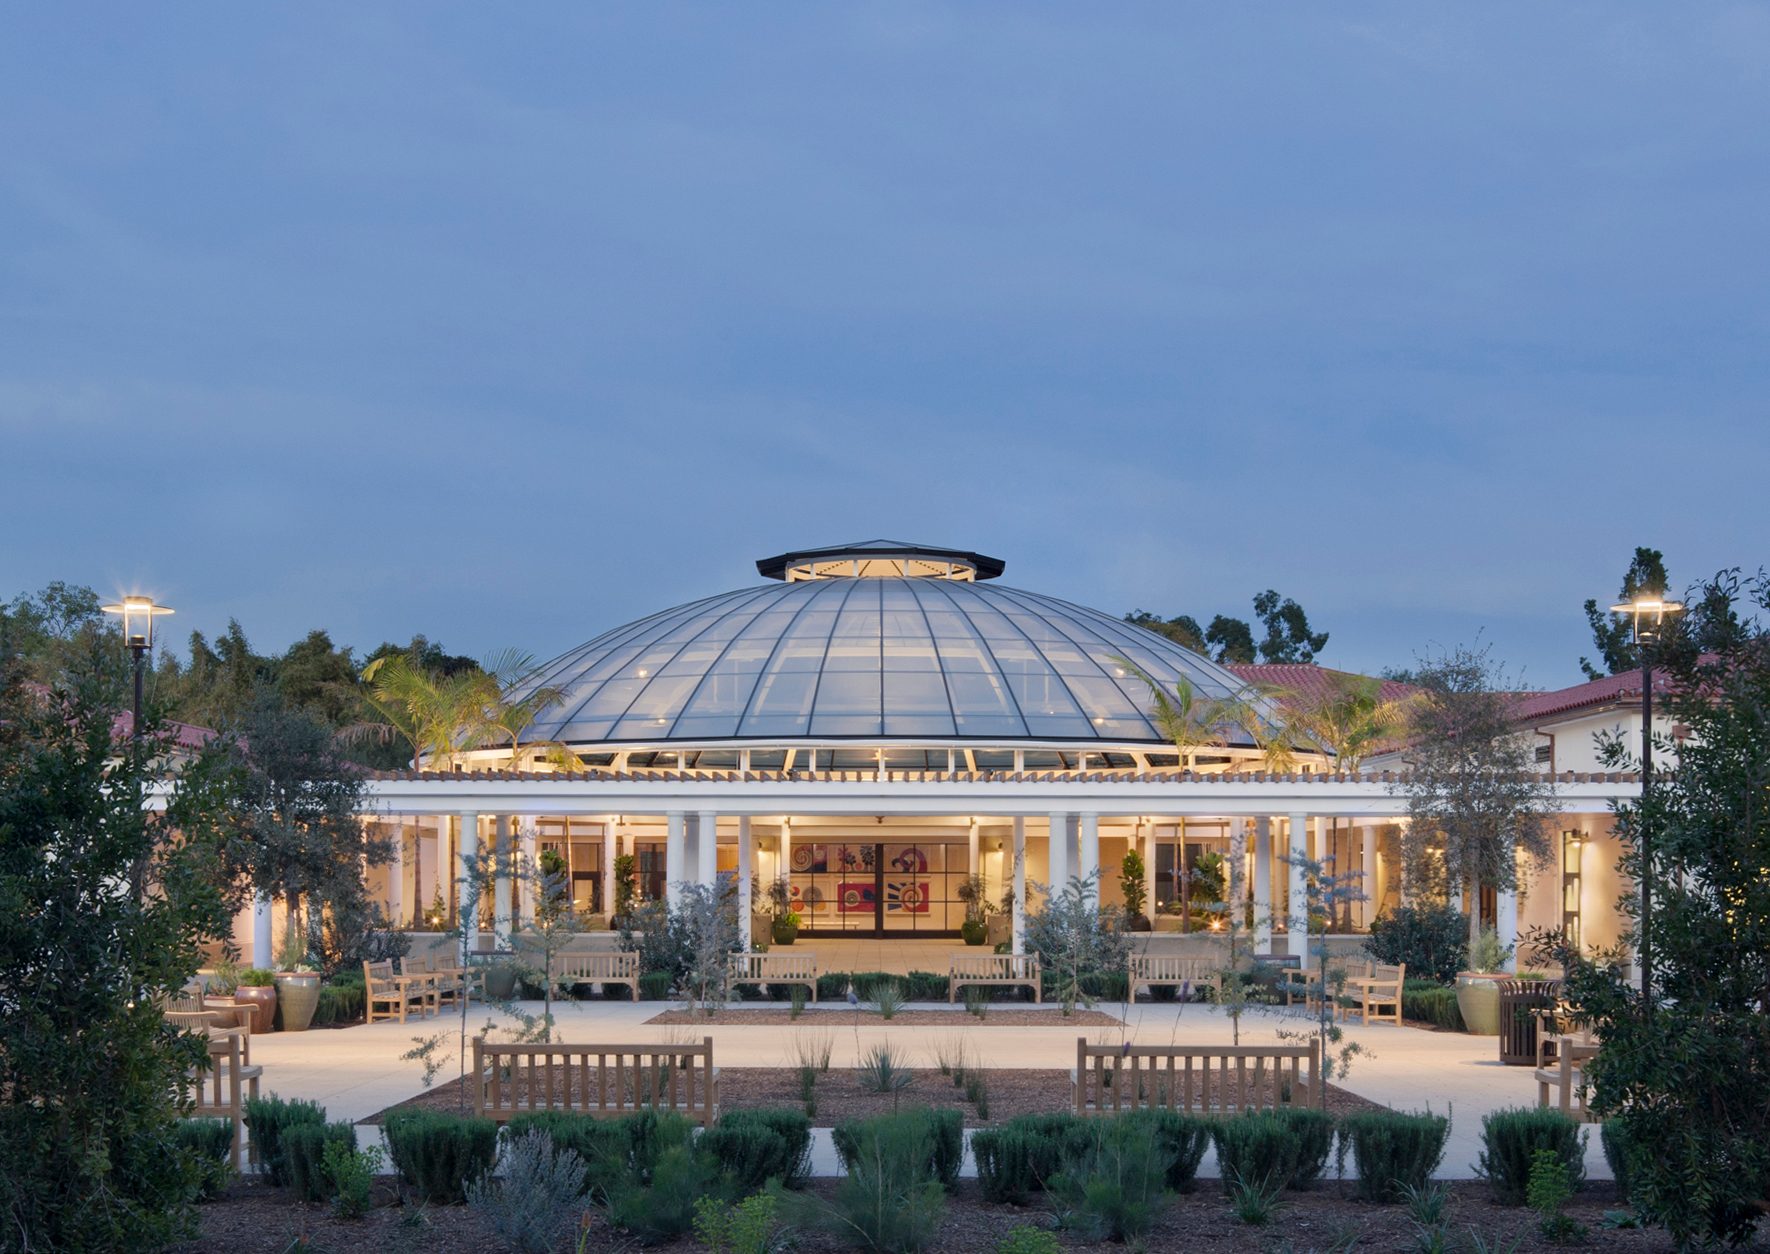 The Huntington Library, Art Collections and Botanical Gardens